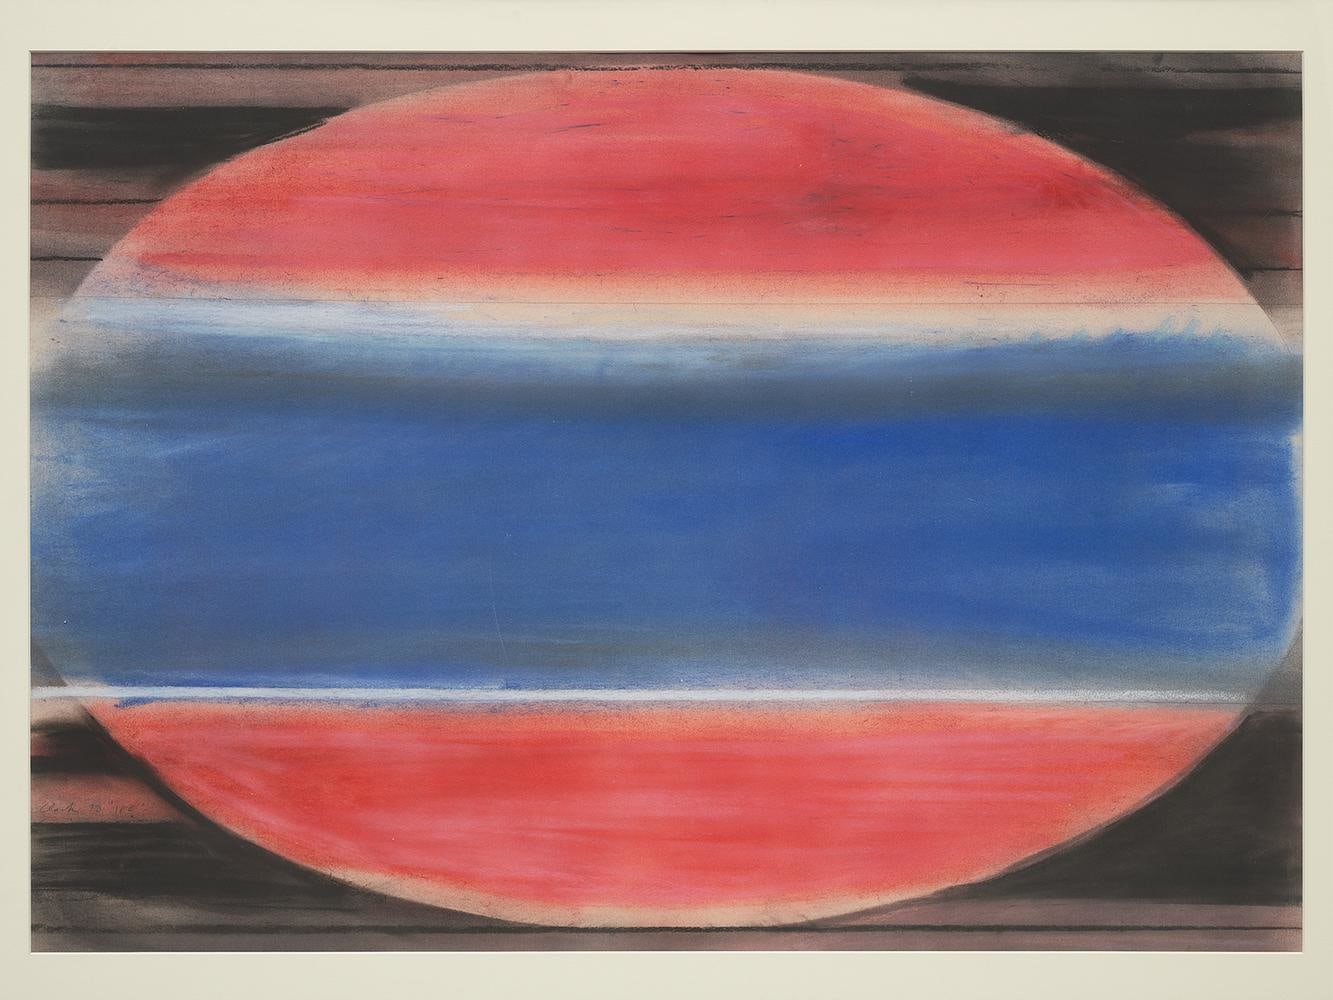 Ed Clark Ife 1973 graphite and pastel on paper 30 x 40 inches (76.2 x 101.6 cm)